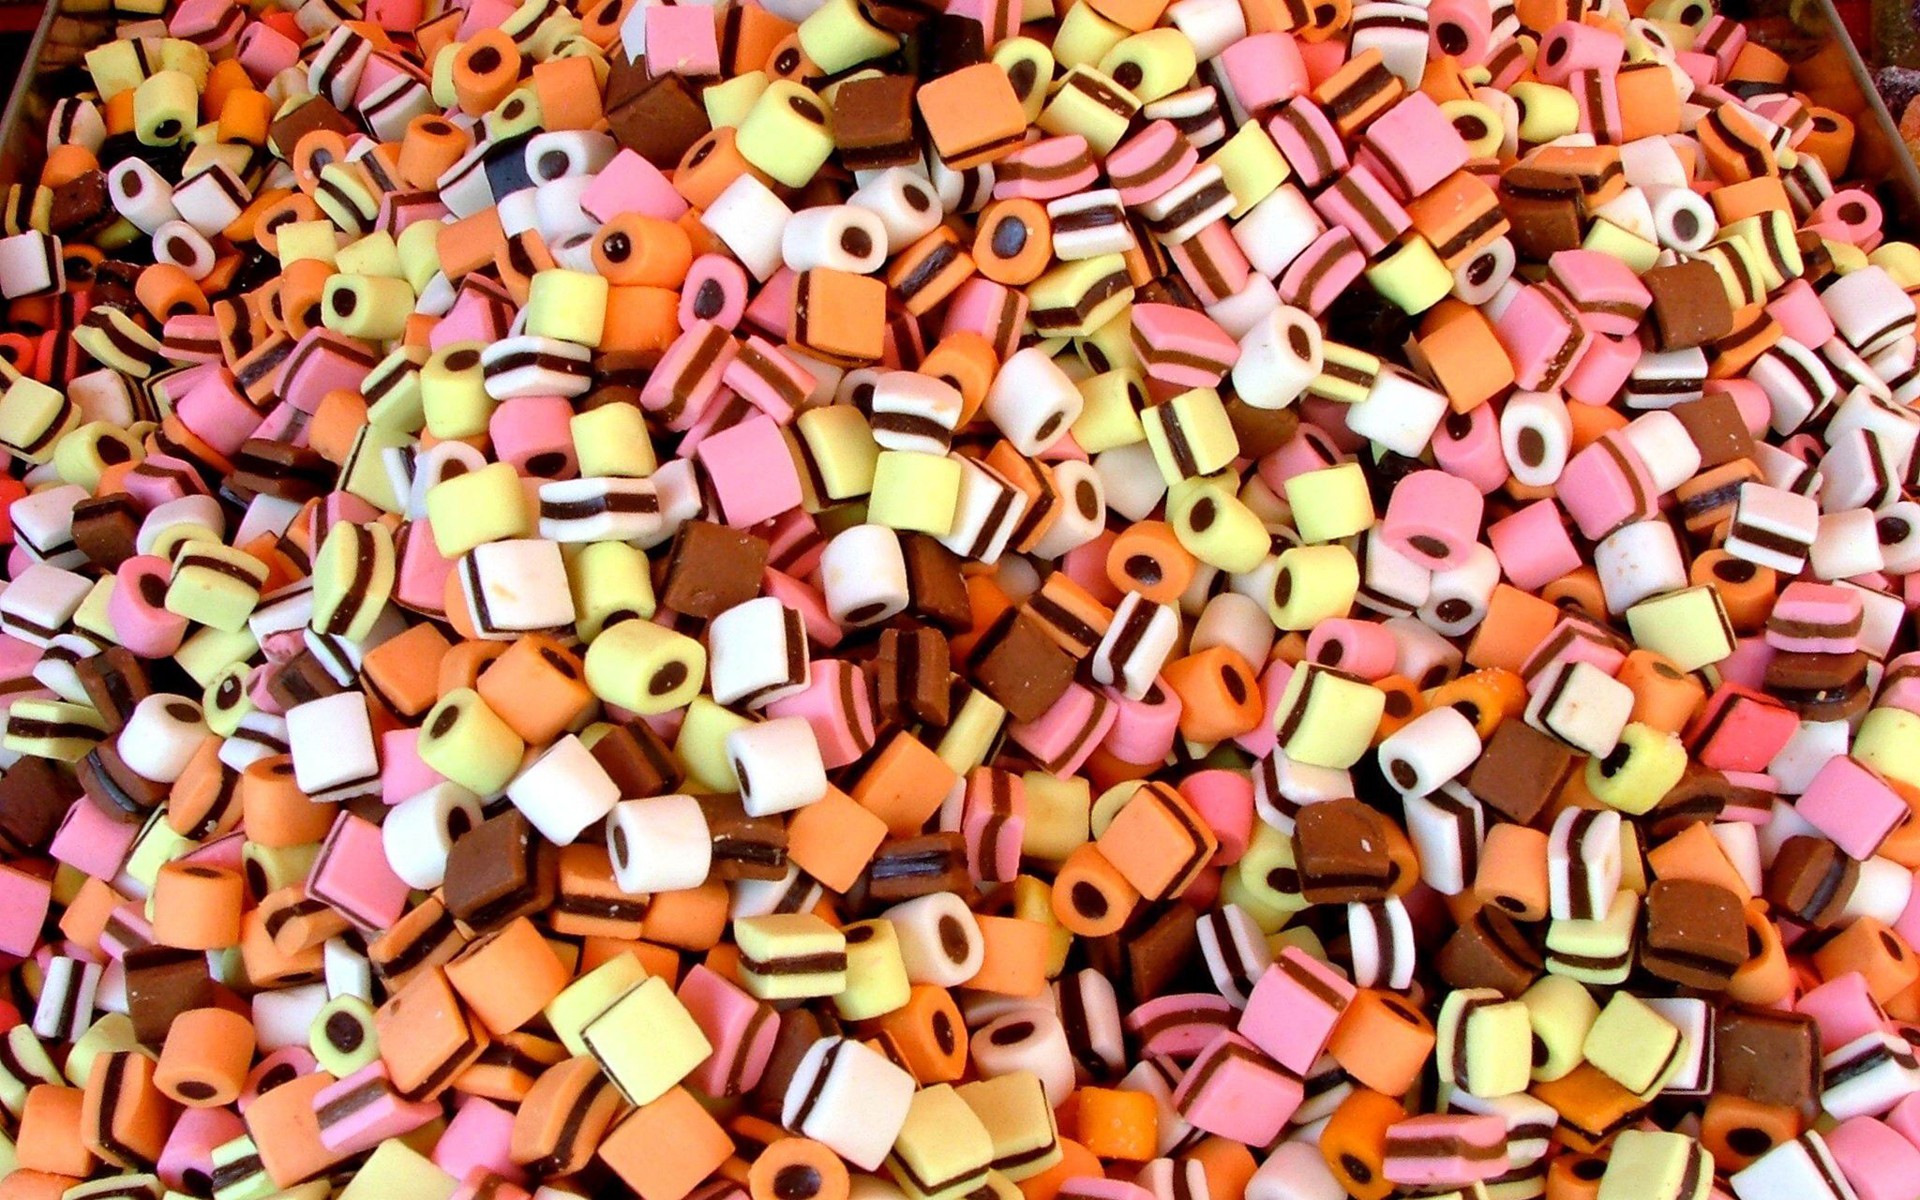 Candy Computer Wallpapers, Desktop Backgrounds | 1920x1200 | ID:190097